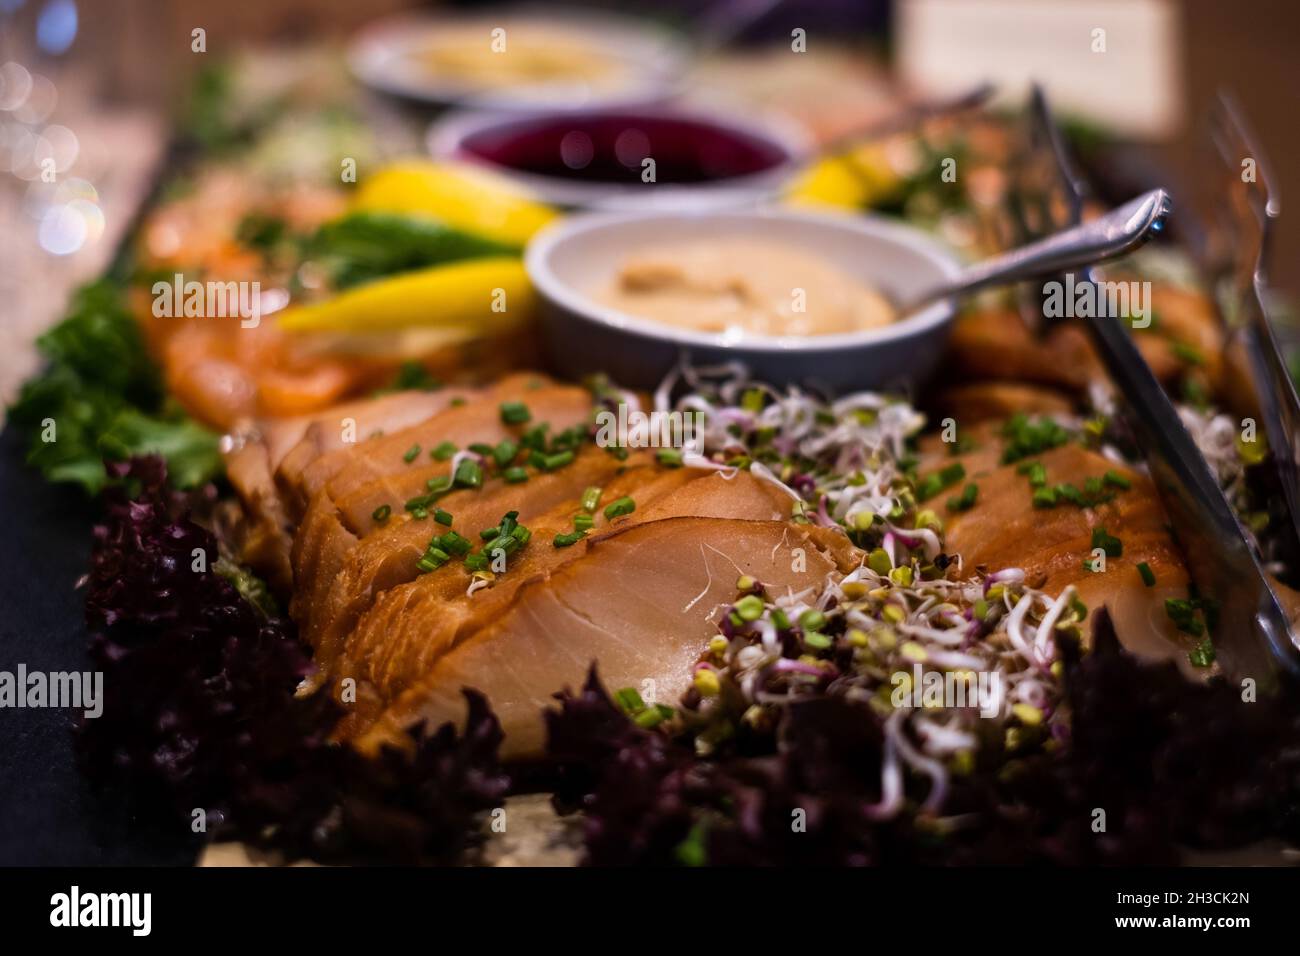 Cold smoked butterfish fillet with smoky honey sauce. Delicious professional looking food and snacks served at catering event or party buffet style. Stock Photo